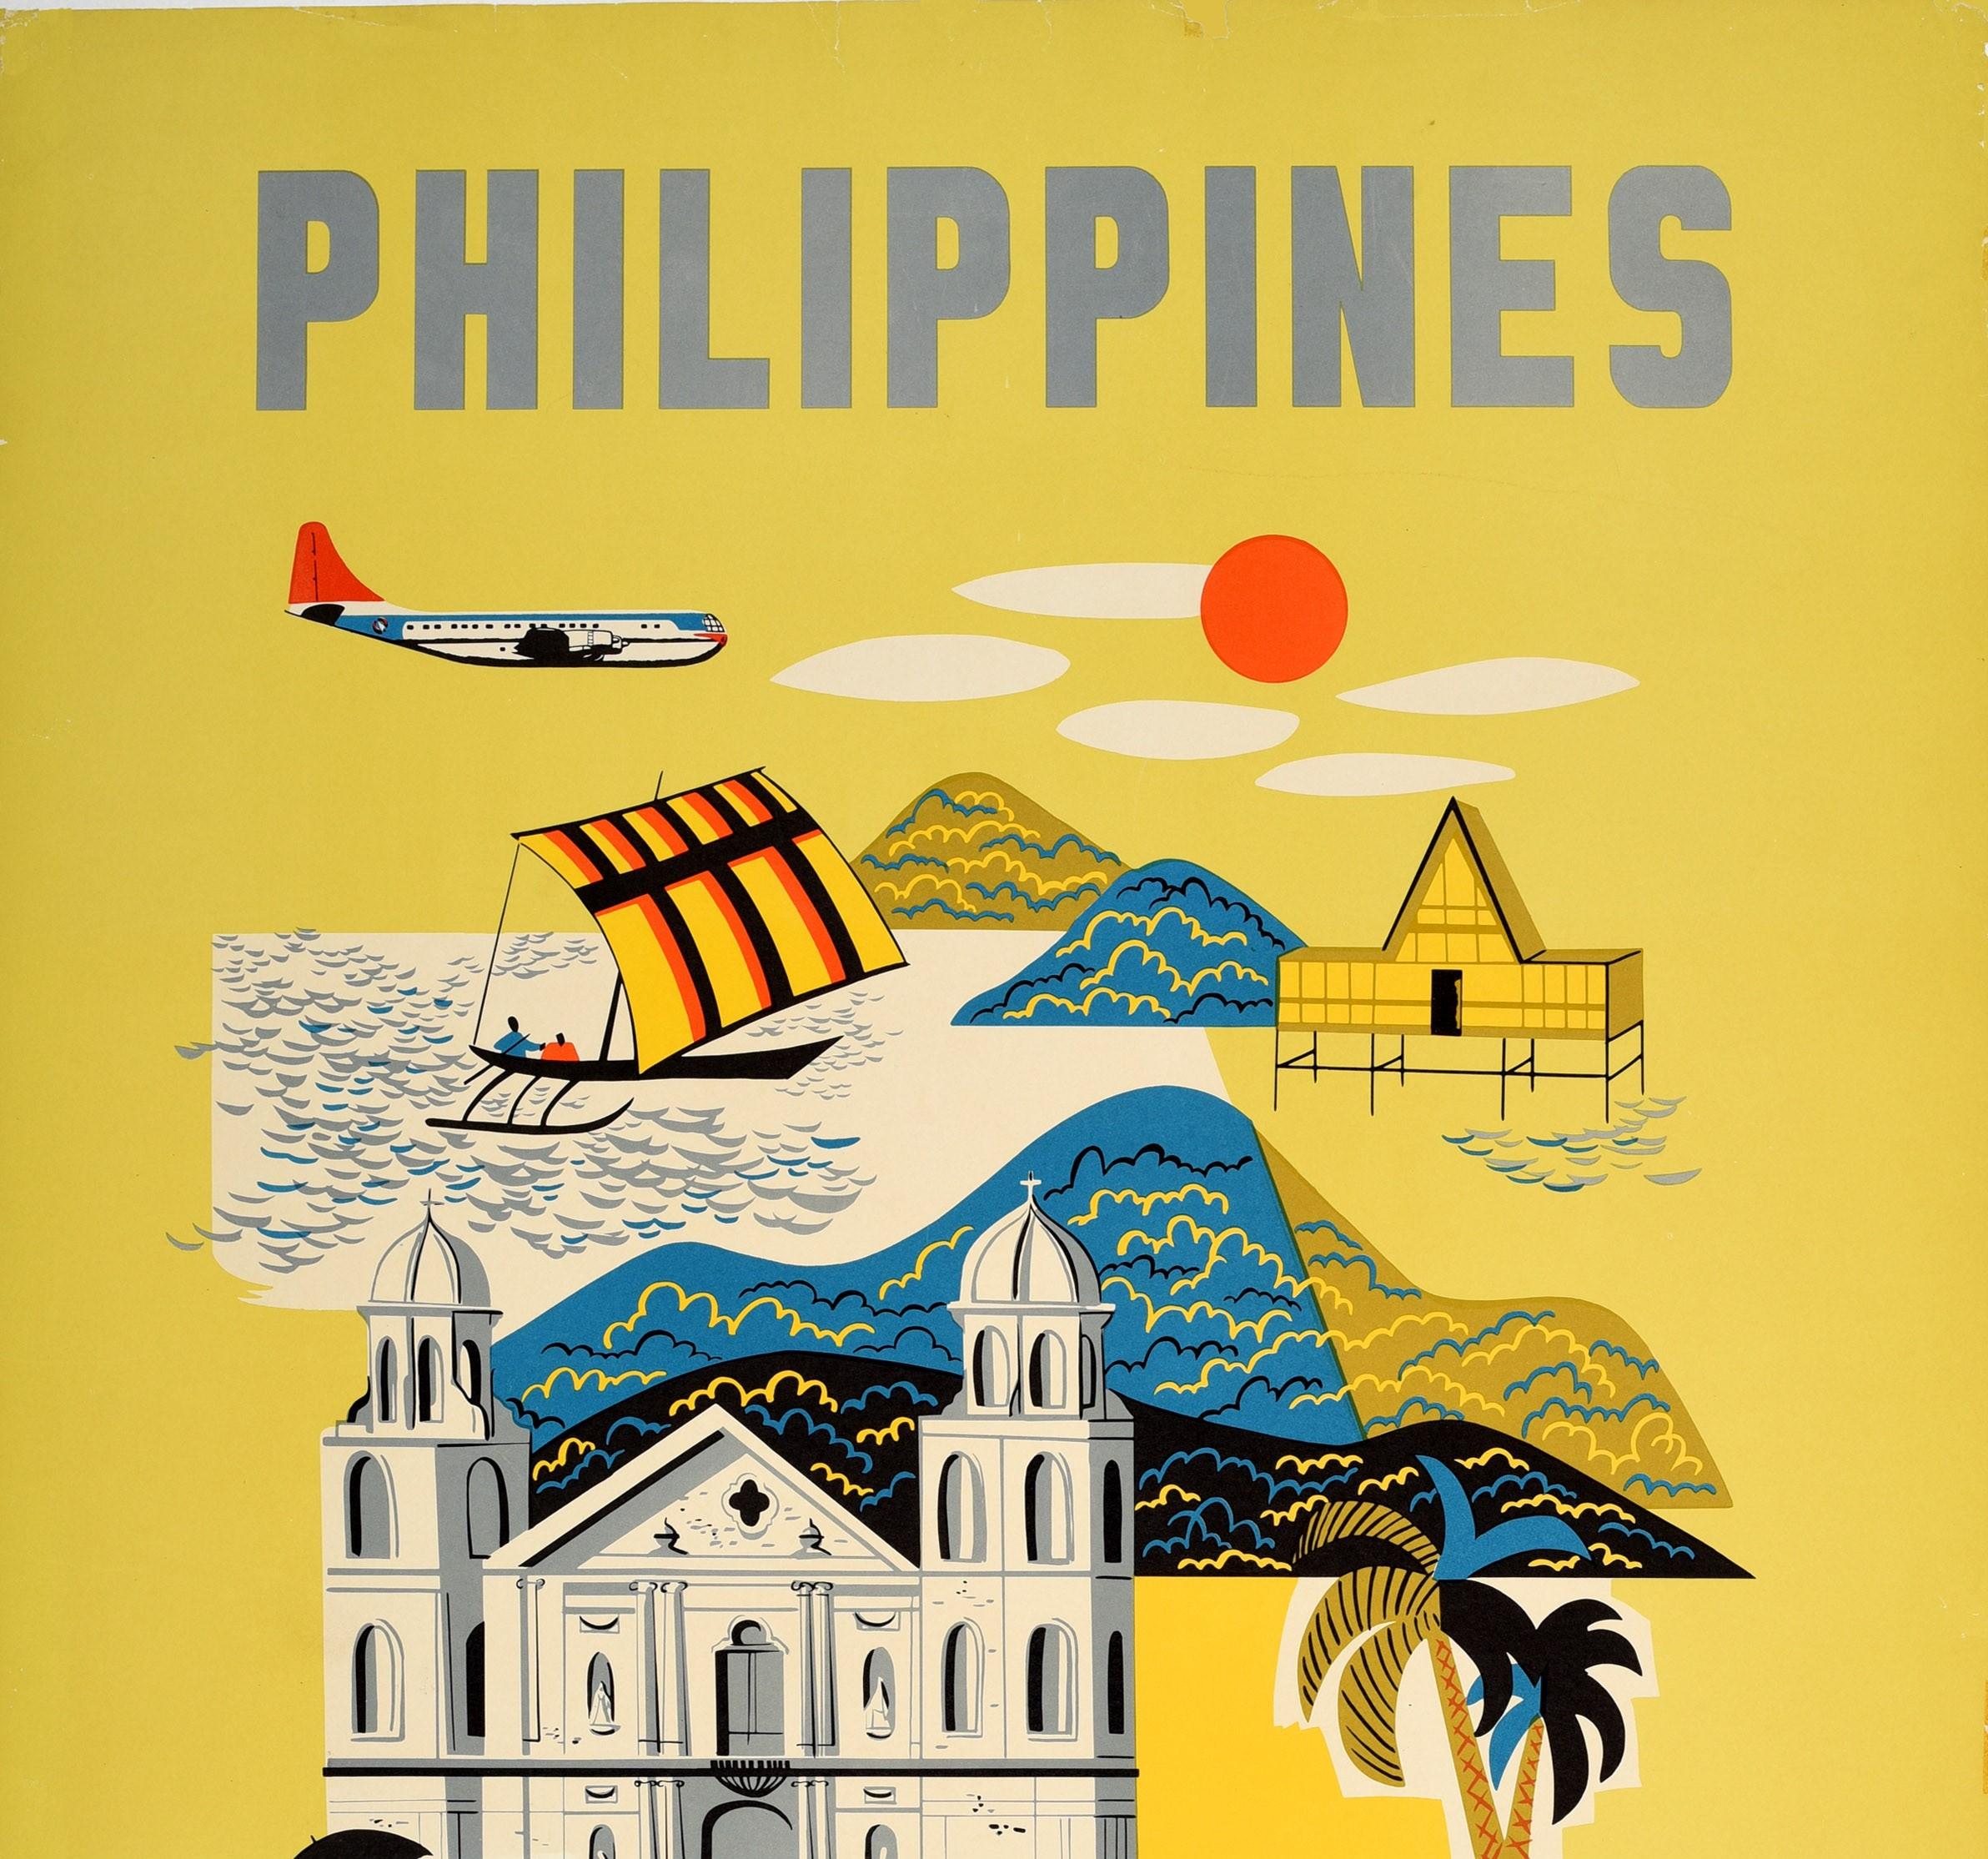 Original vintage Asia travel poster for the Philippines Fly Northwest Orient Airlines featuring illustrations depicting a farmer walking next to his oxen drawn cart, tourists in front of an historic building, palms trees and hills, a traditional